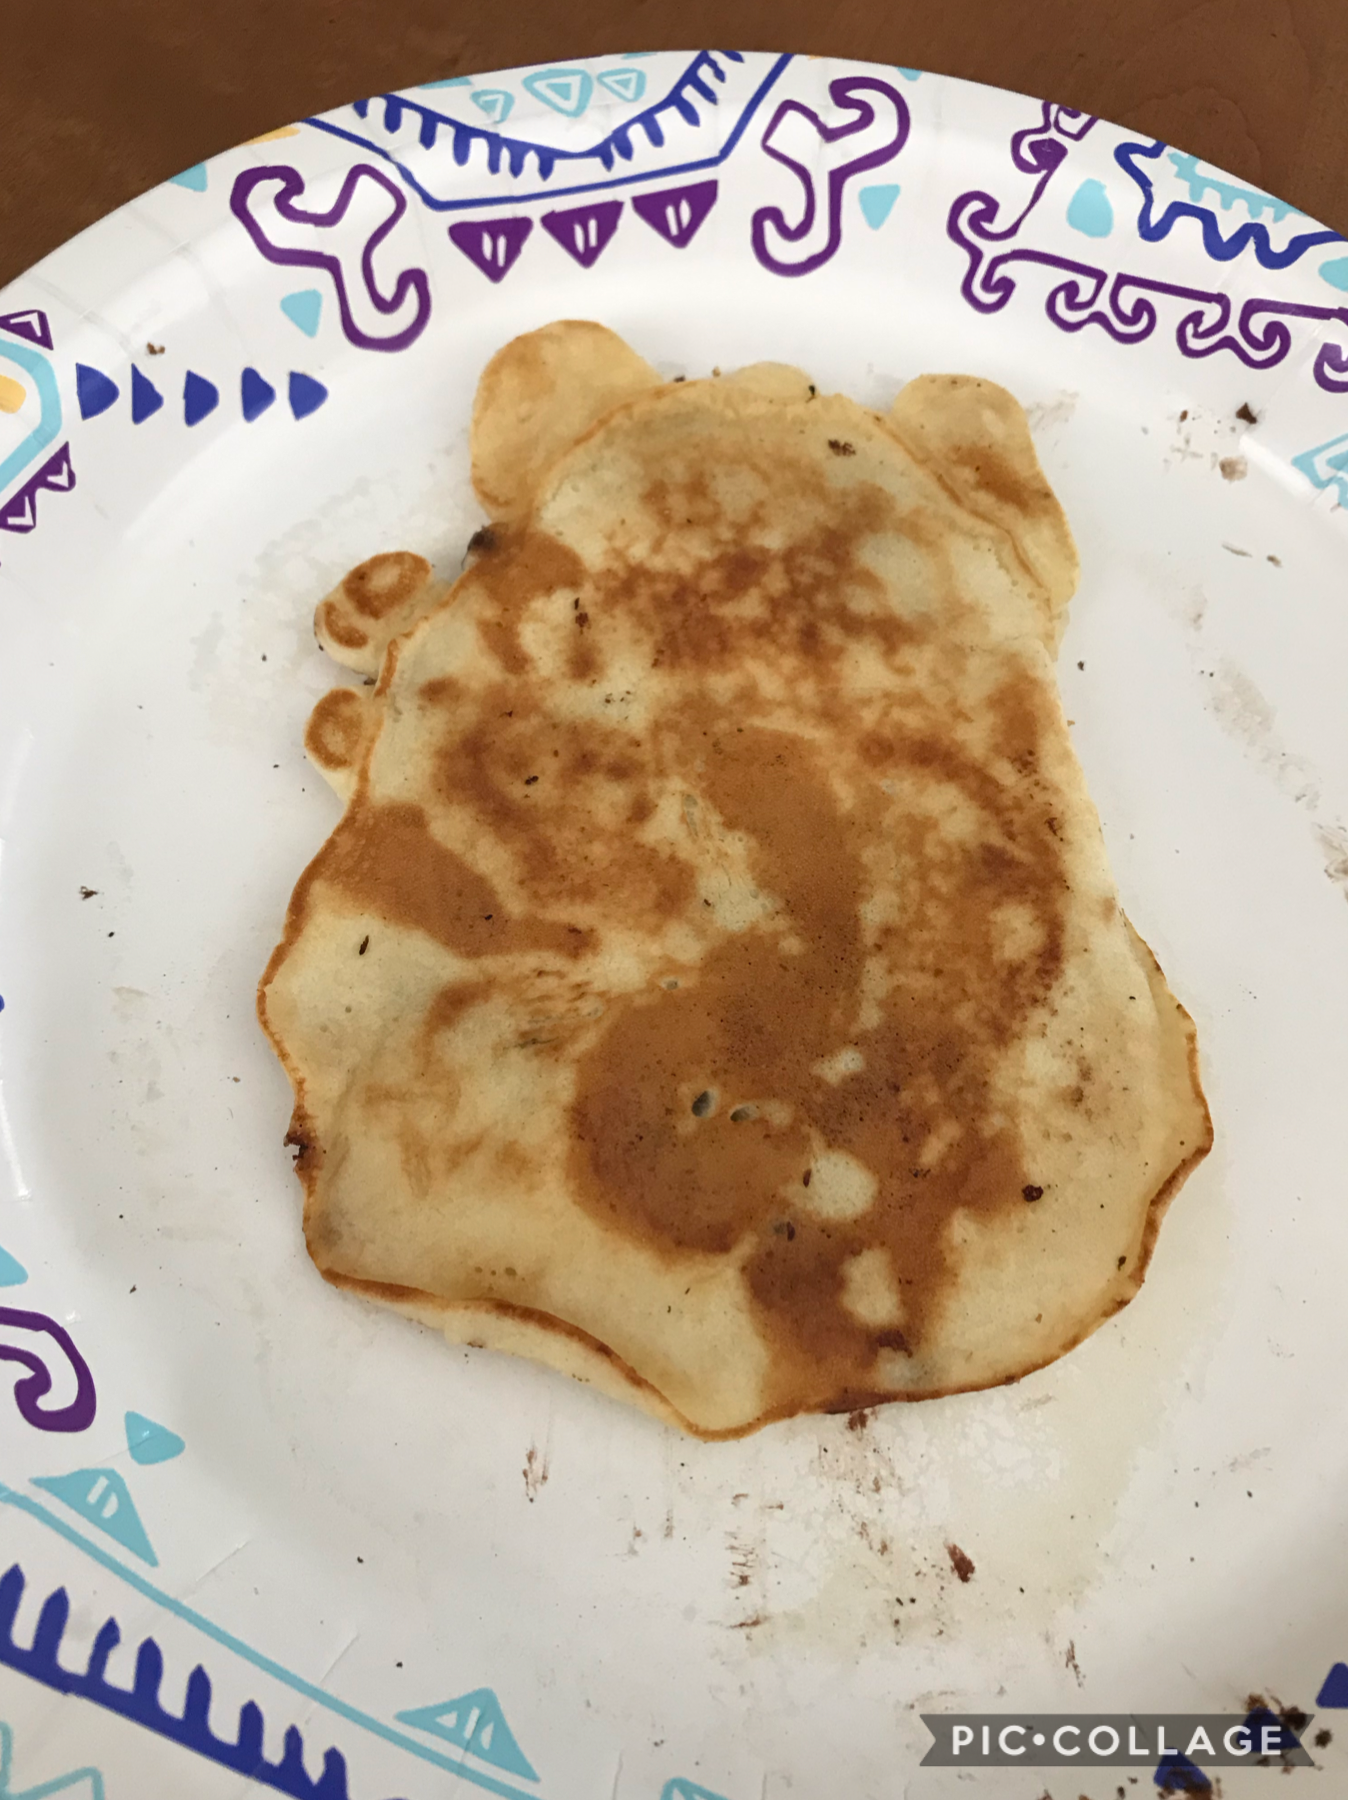 This is a pancake that I named mouse man